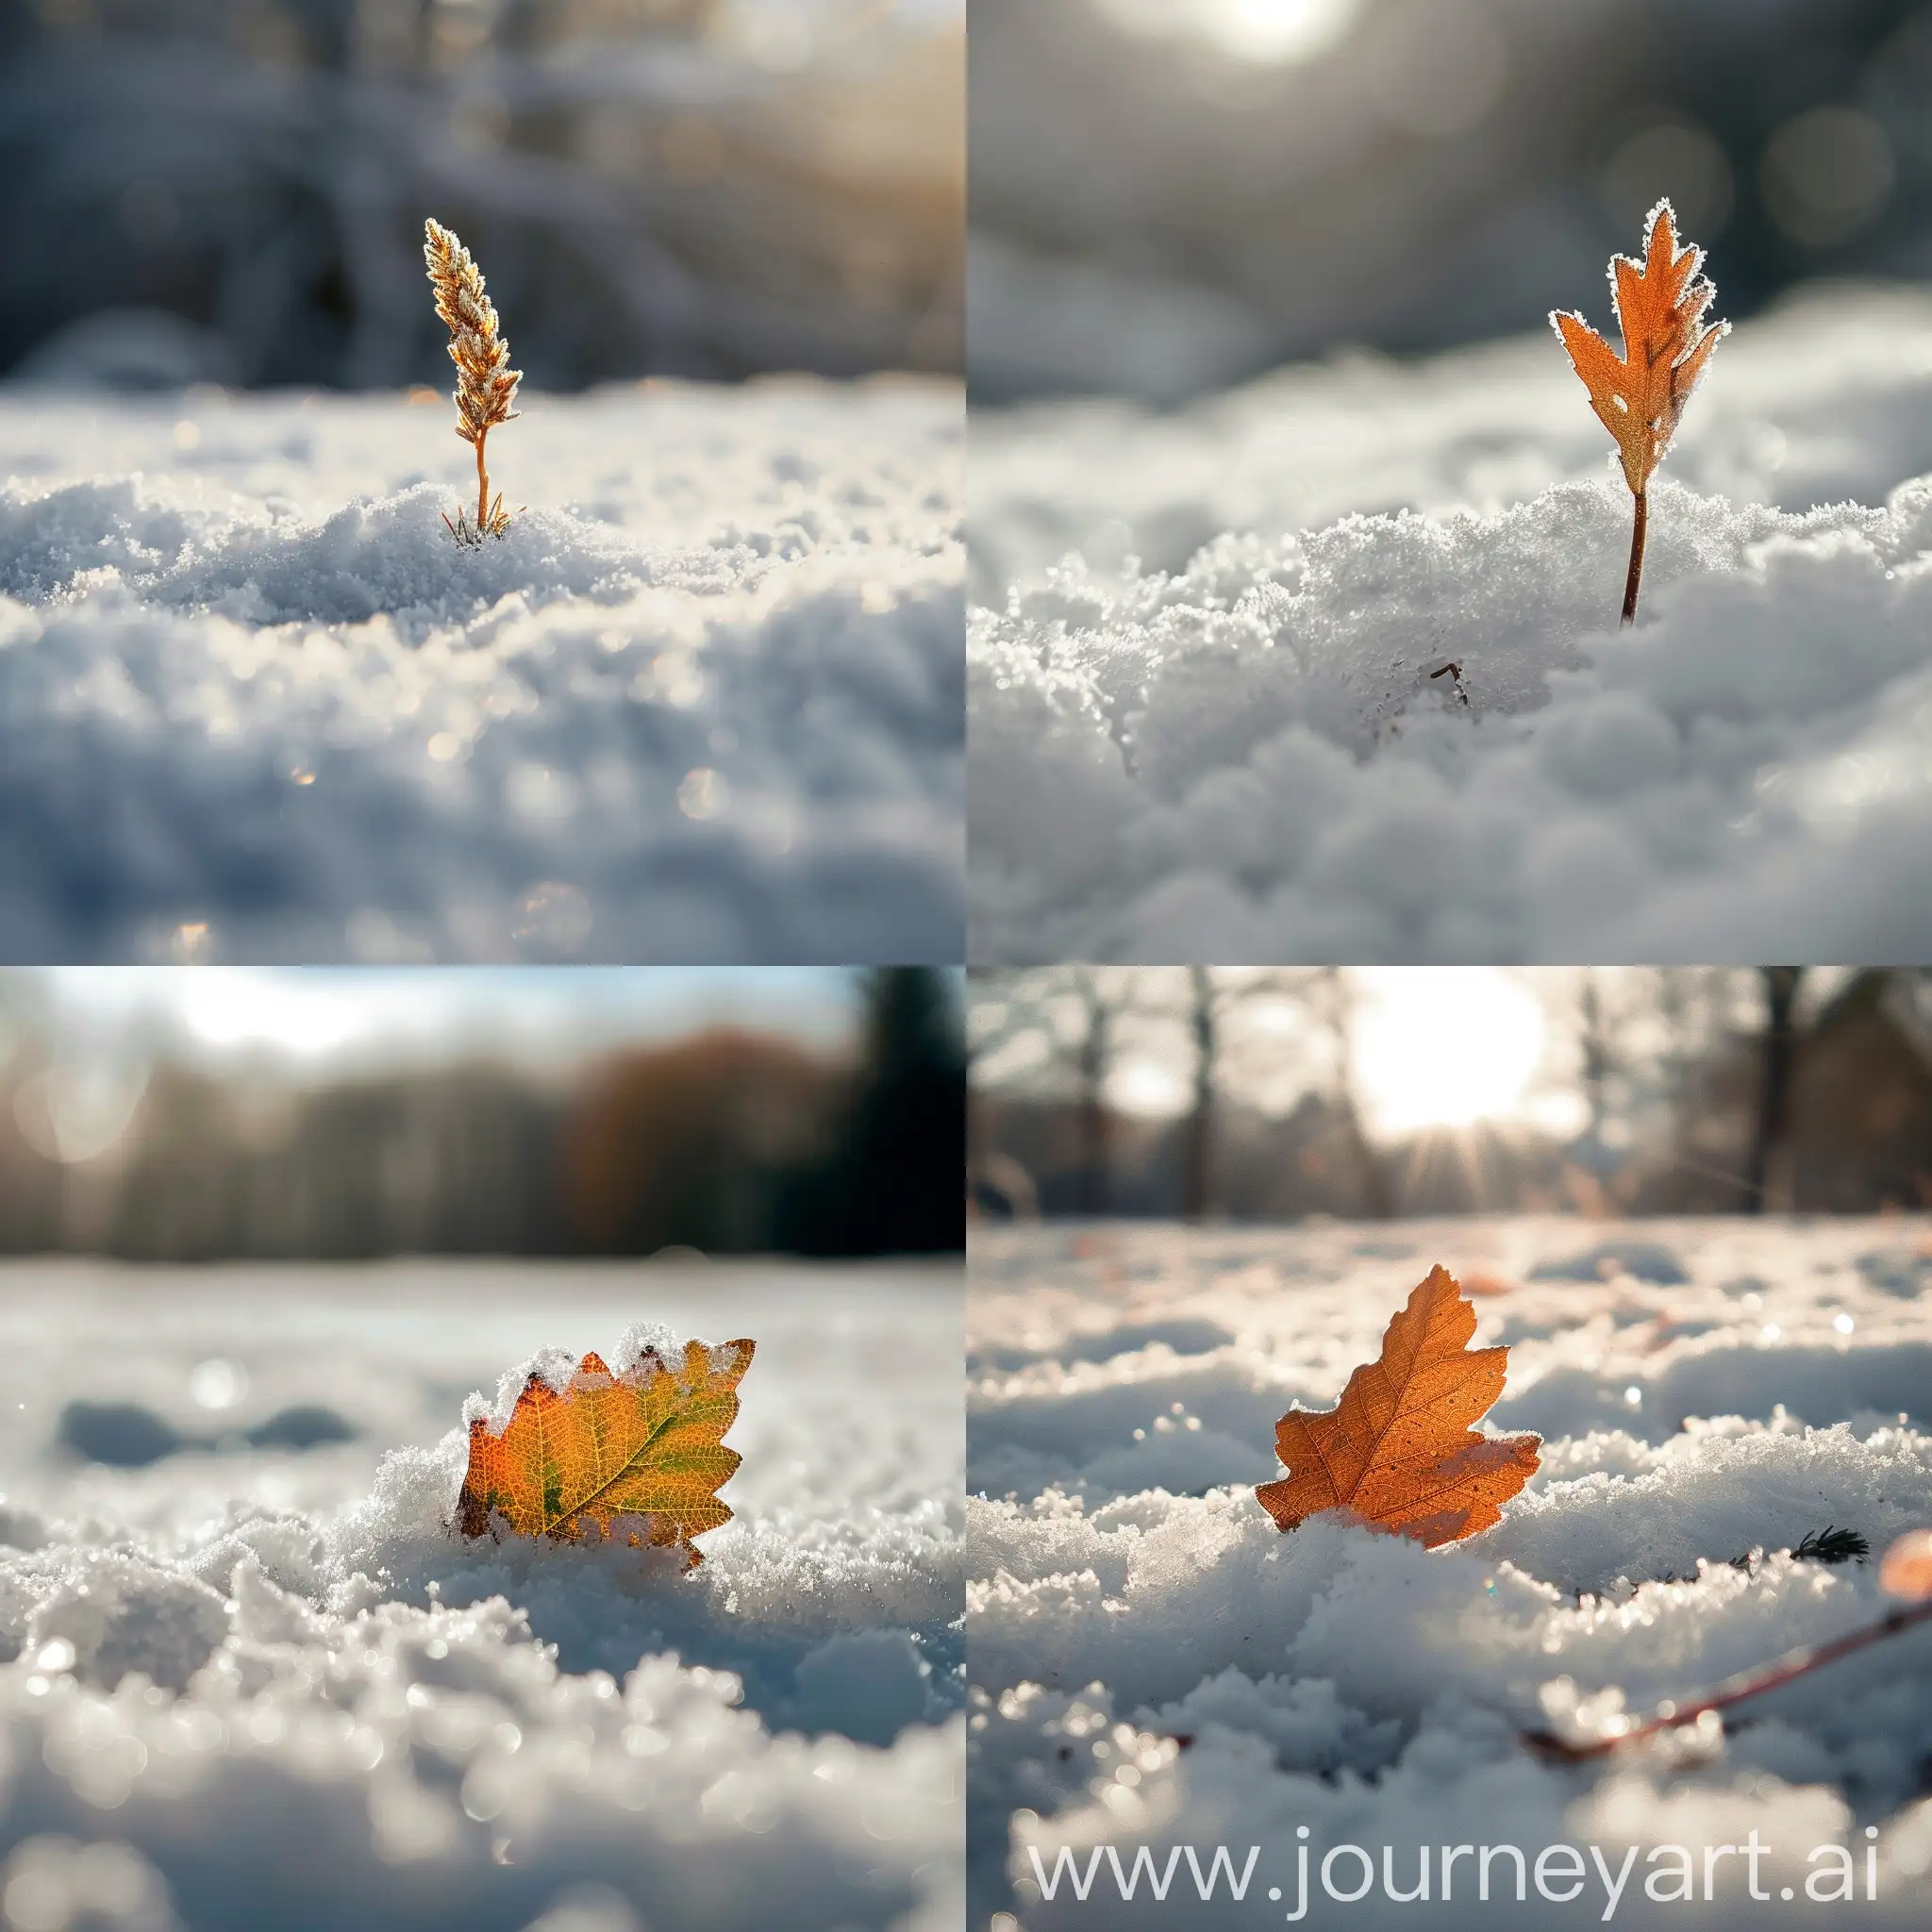 Tranquil-Winter-Scene-Heather-Leaf-Emerges-from-Snow